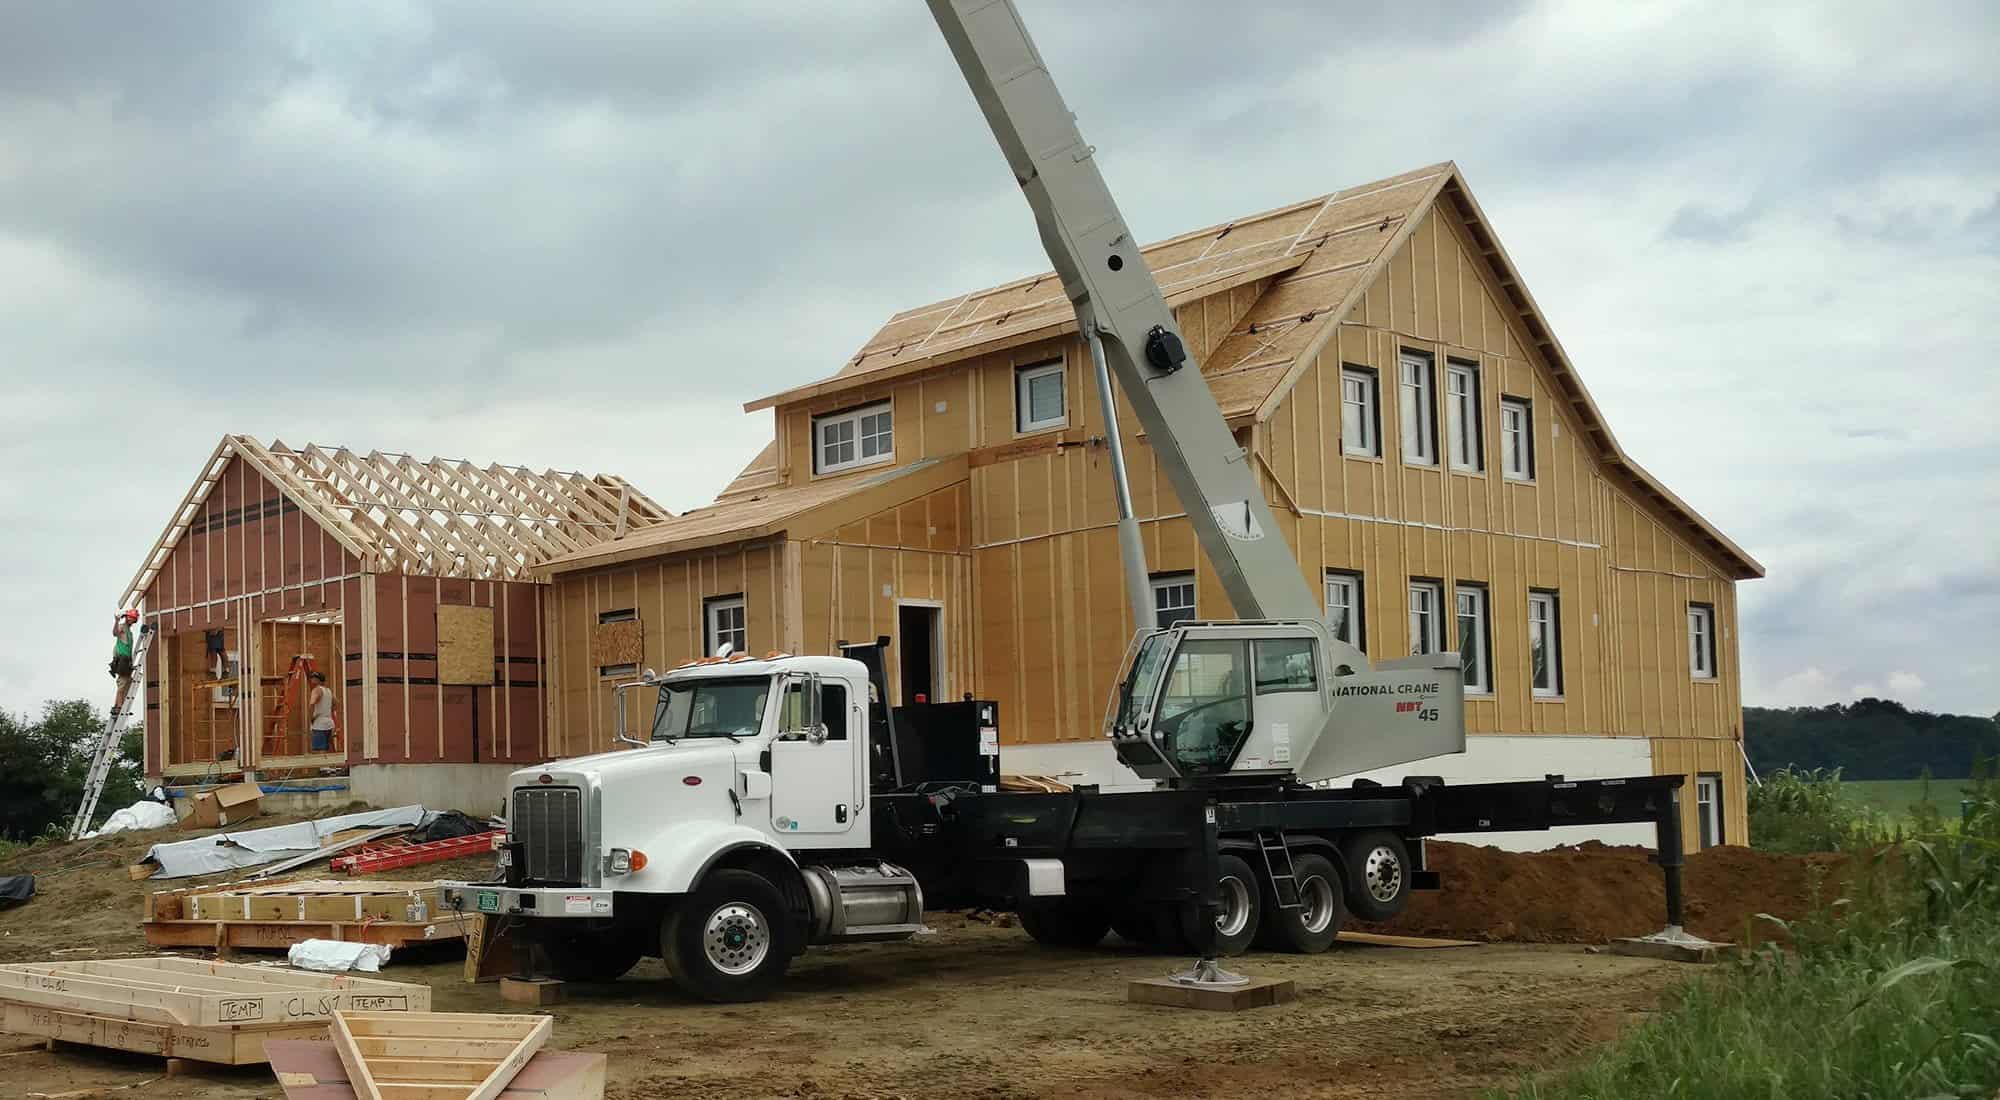 On-site prefab home assembly and finishing happens quickly - usually within 2 months.